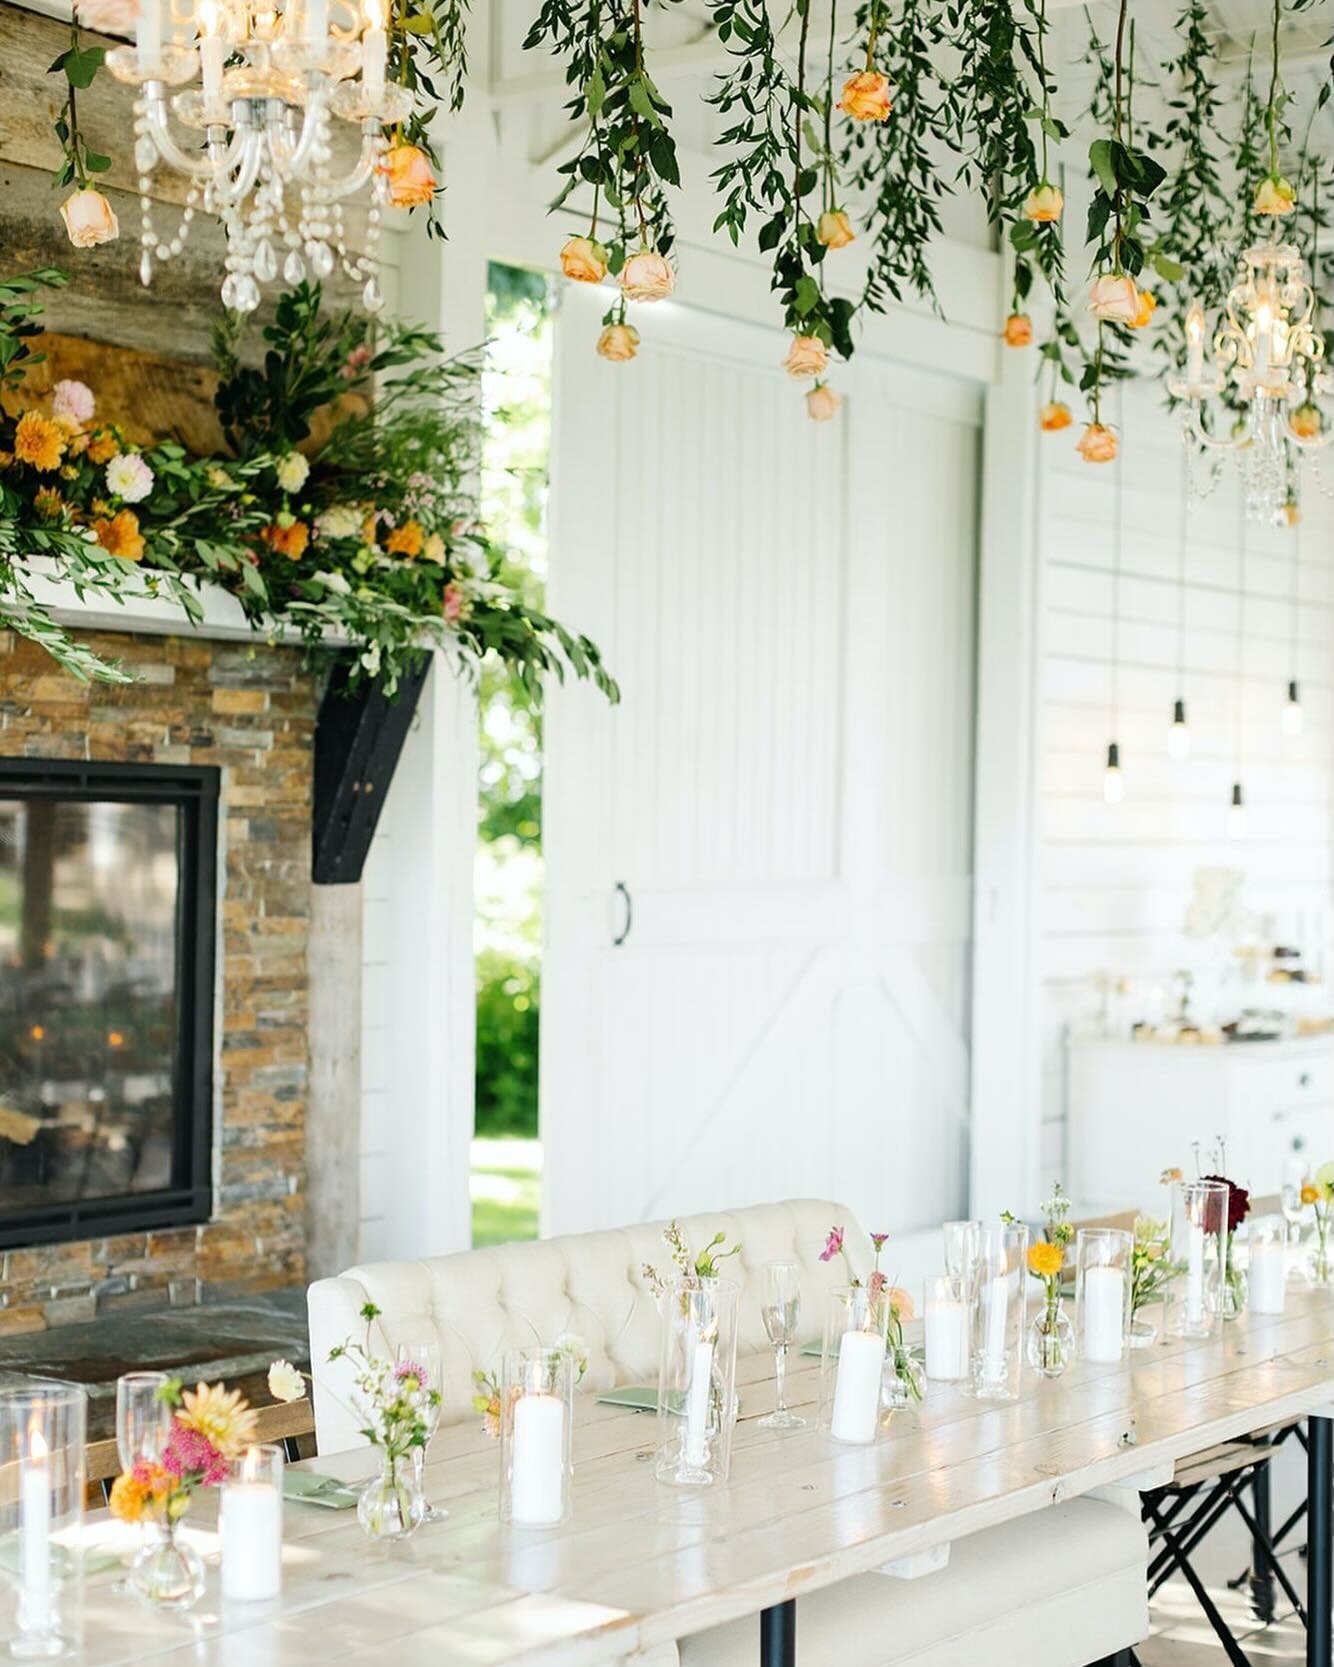 Do florists ever say &ldquo;no&rdquo; when someone wants to book?!? ✨

ANSWER:  Yes!  As wedding florists, wedding planners, and as an event rental company we have to say &ldquo;no&rdquo; to new bookings every. single. day. 

And we hate that part of